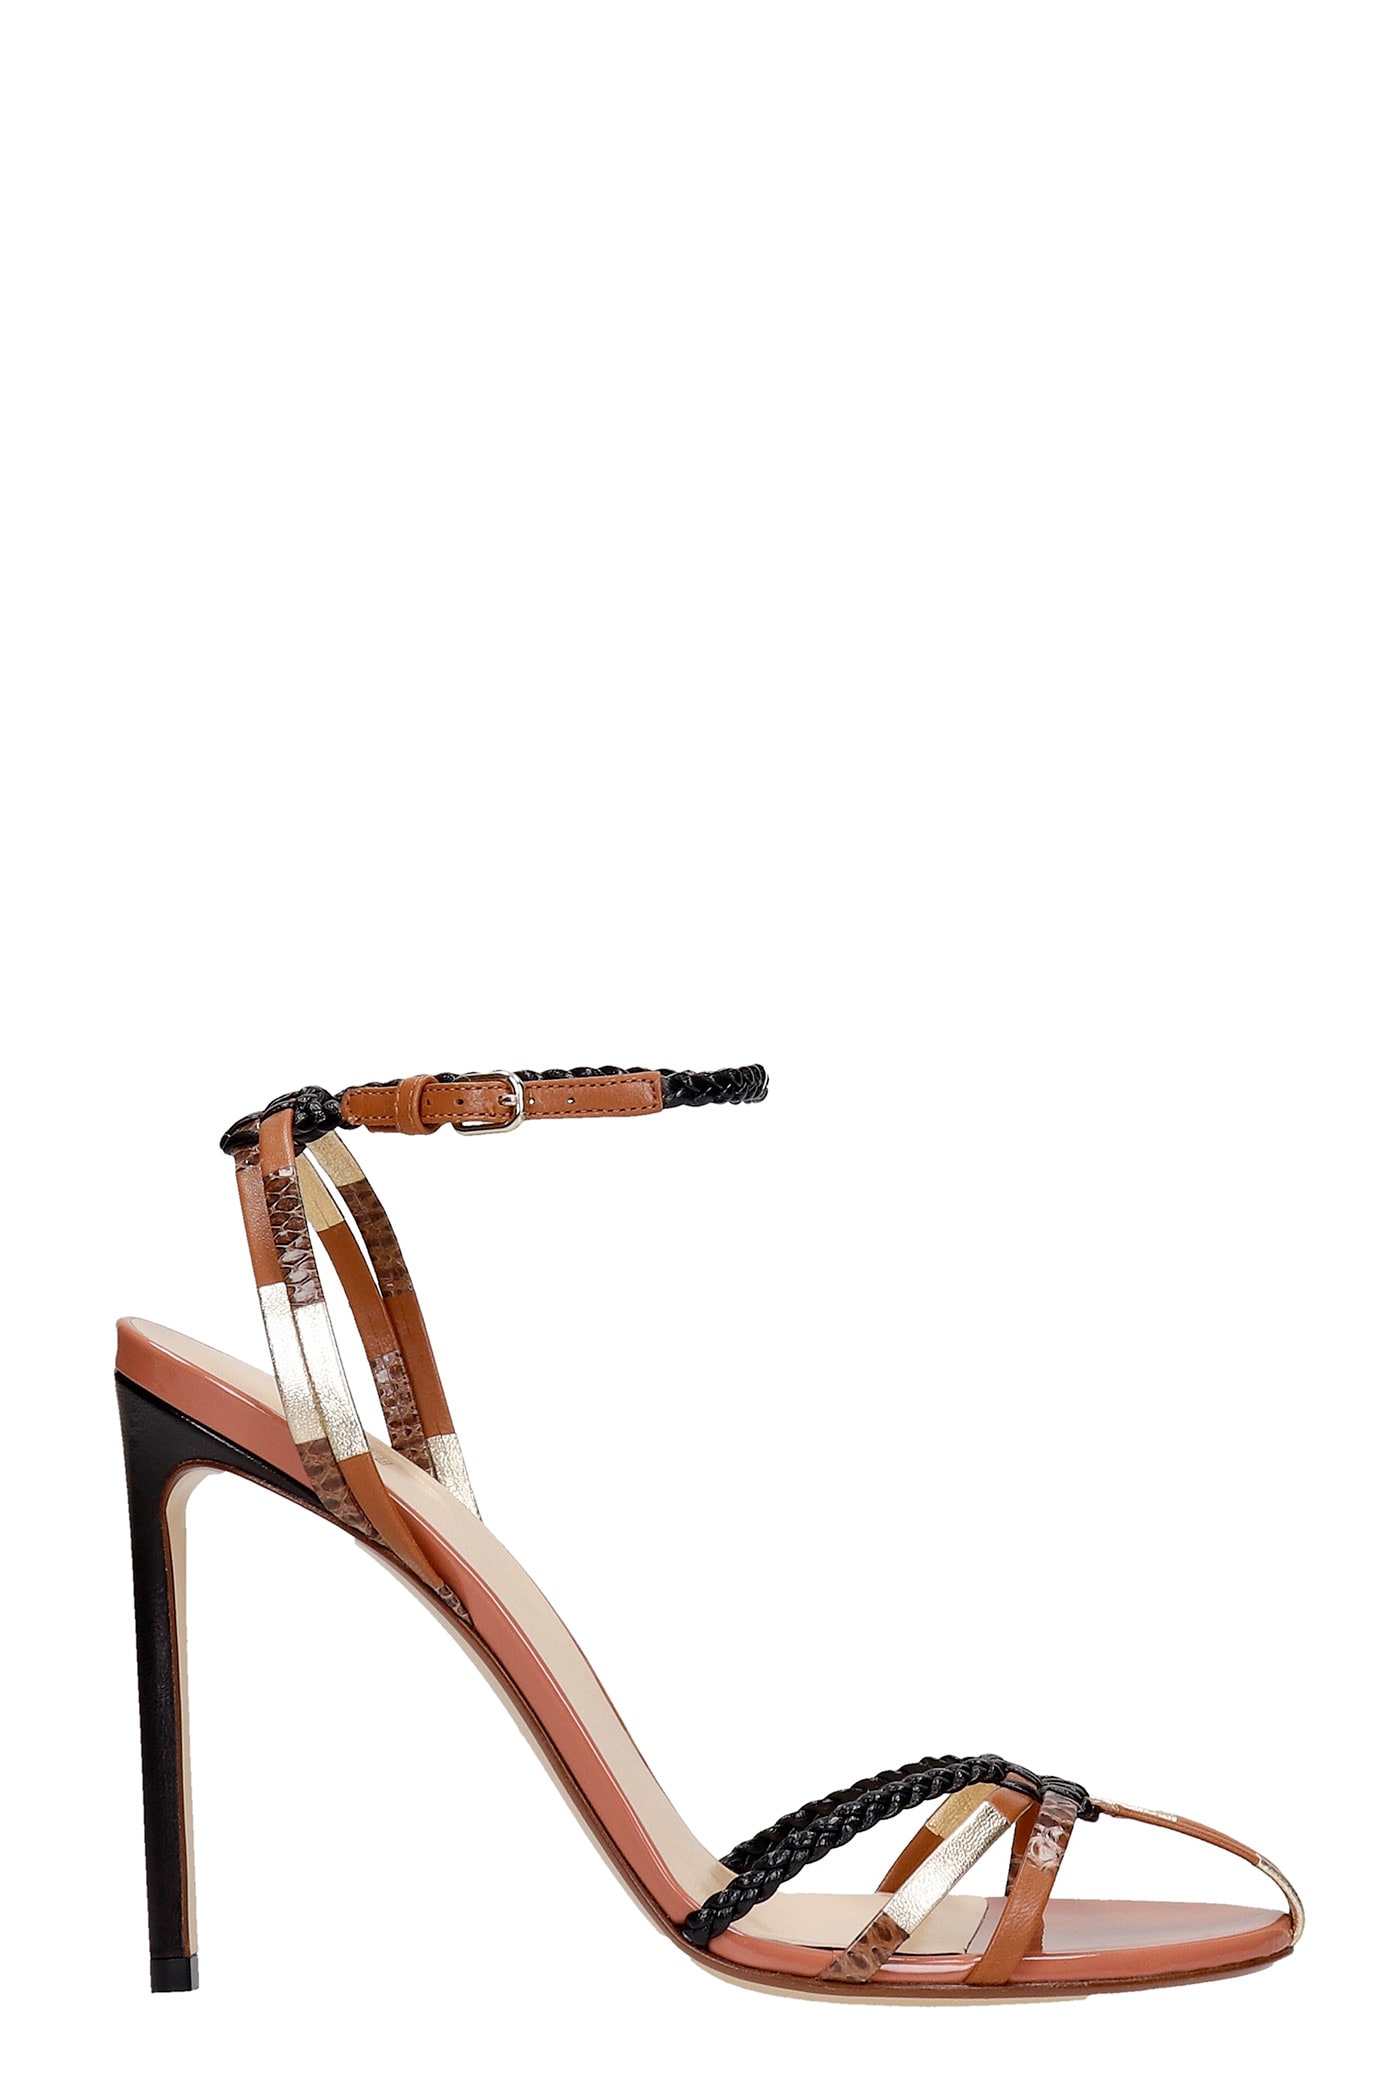 Francesco Russo Sandals In Leather Color Leather